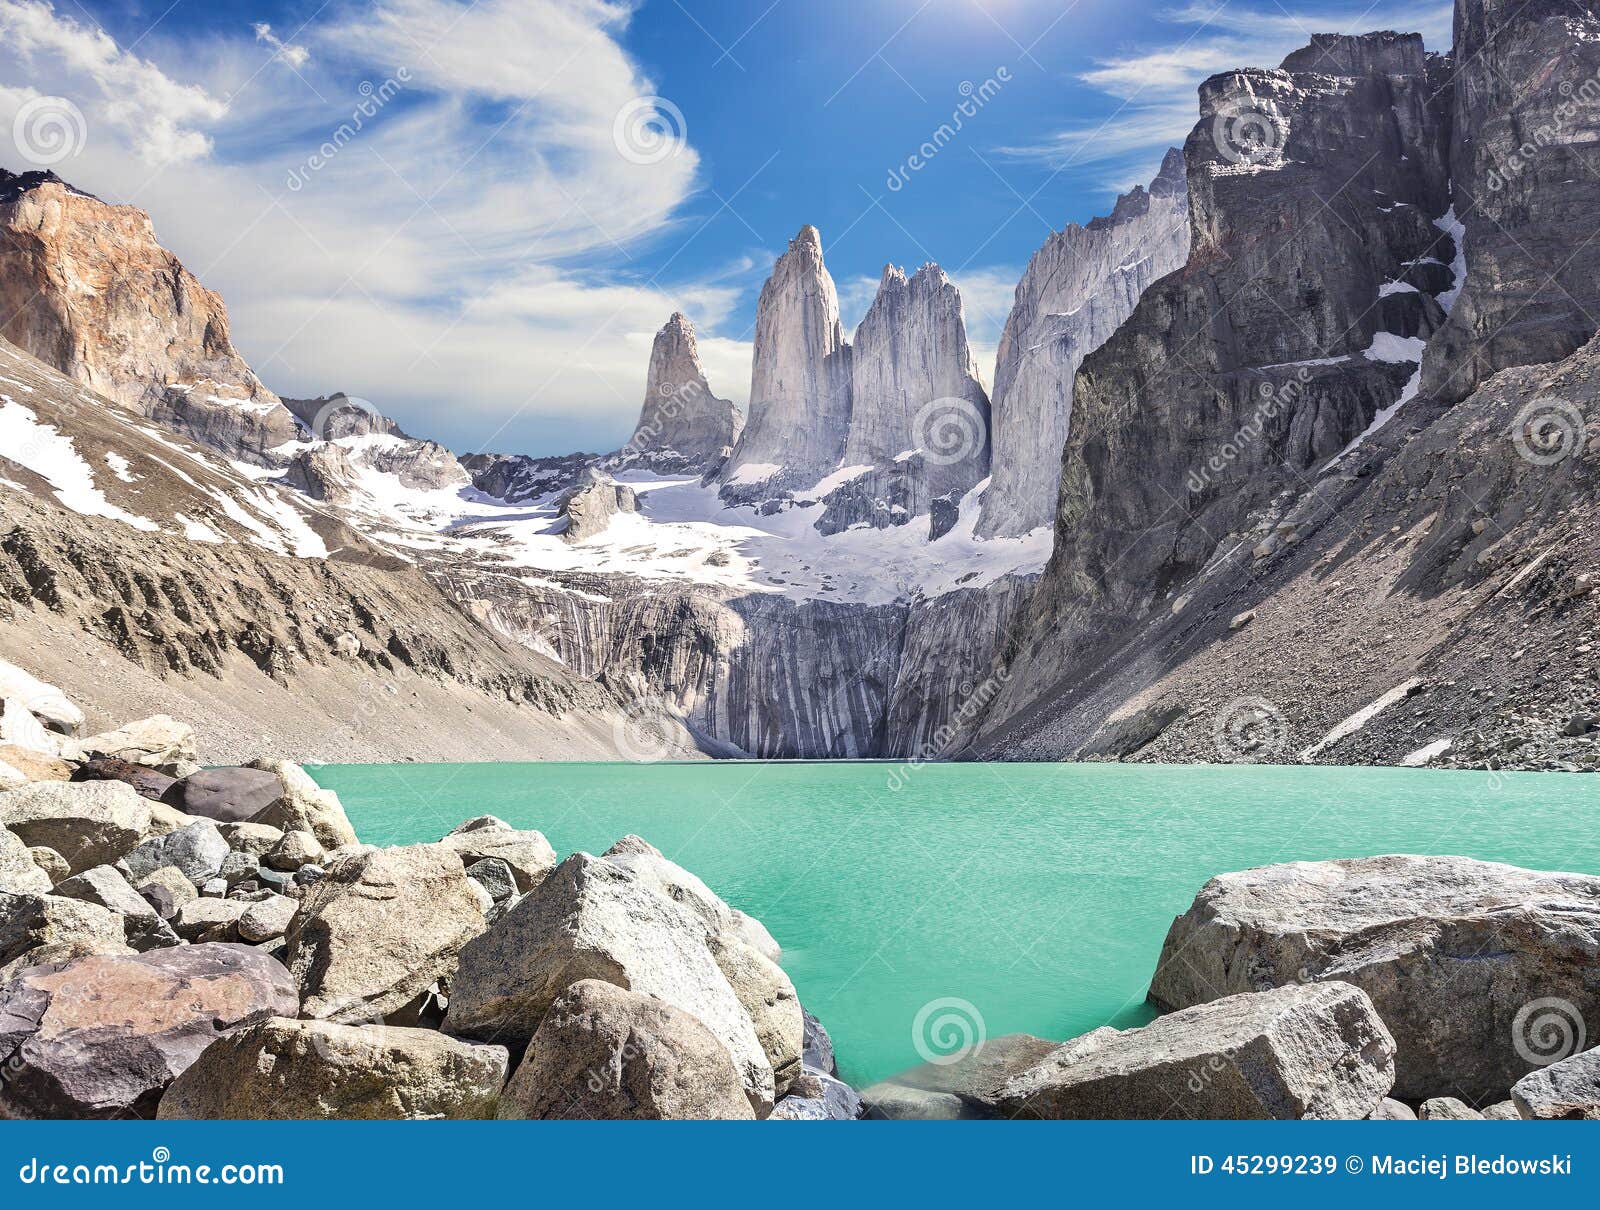 torres del paine mountains, patagonia, chile